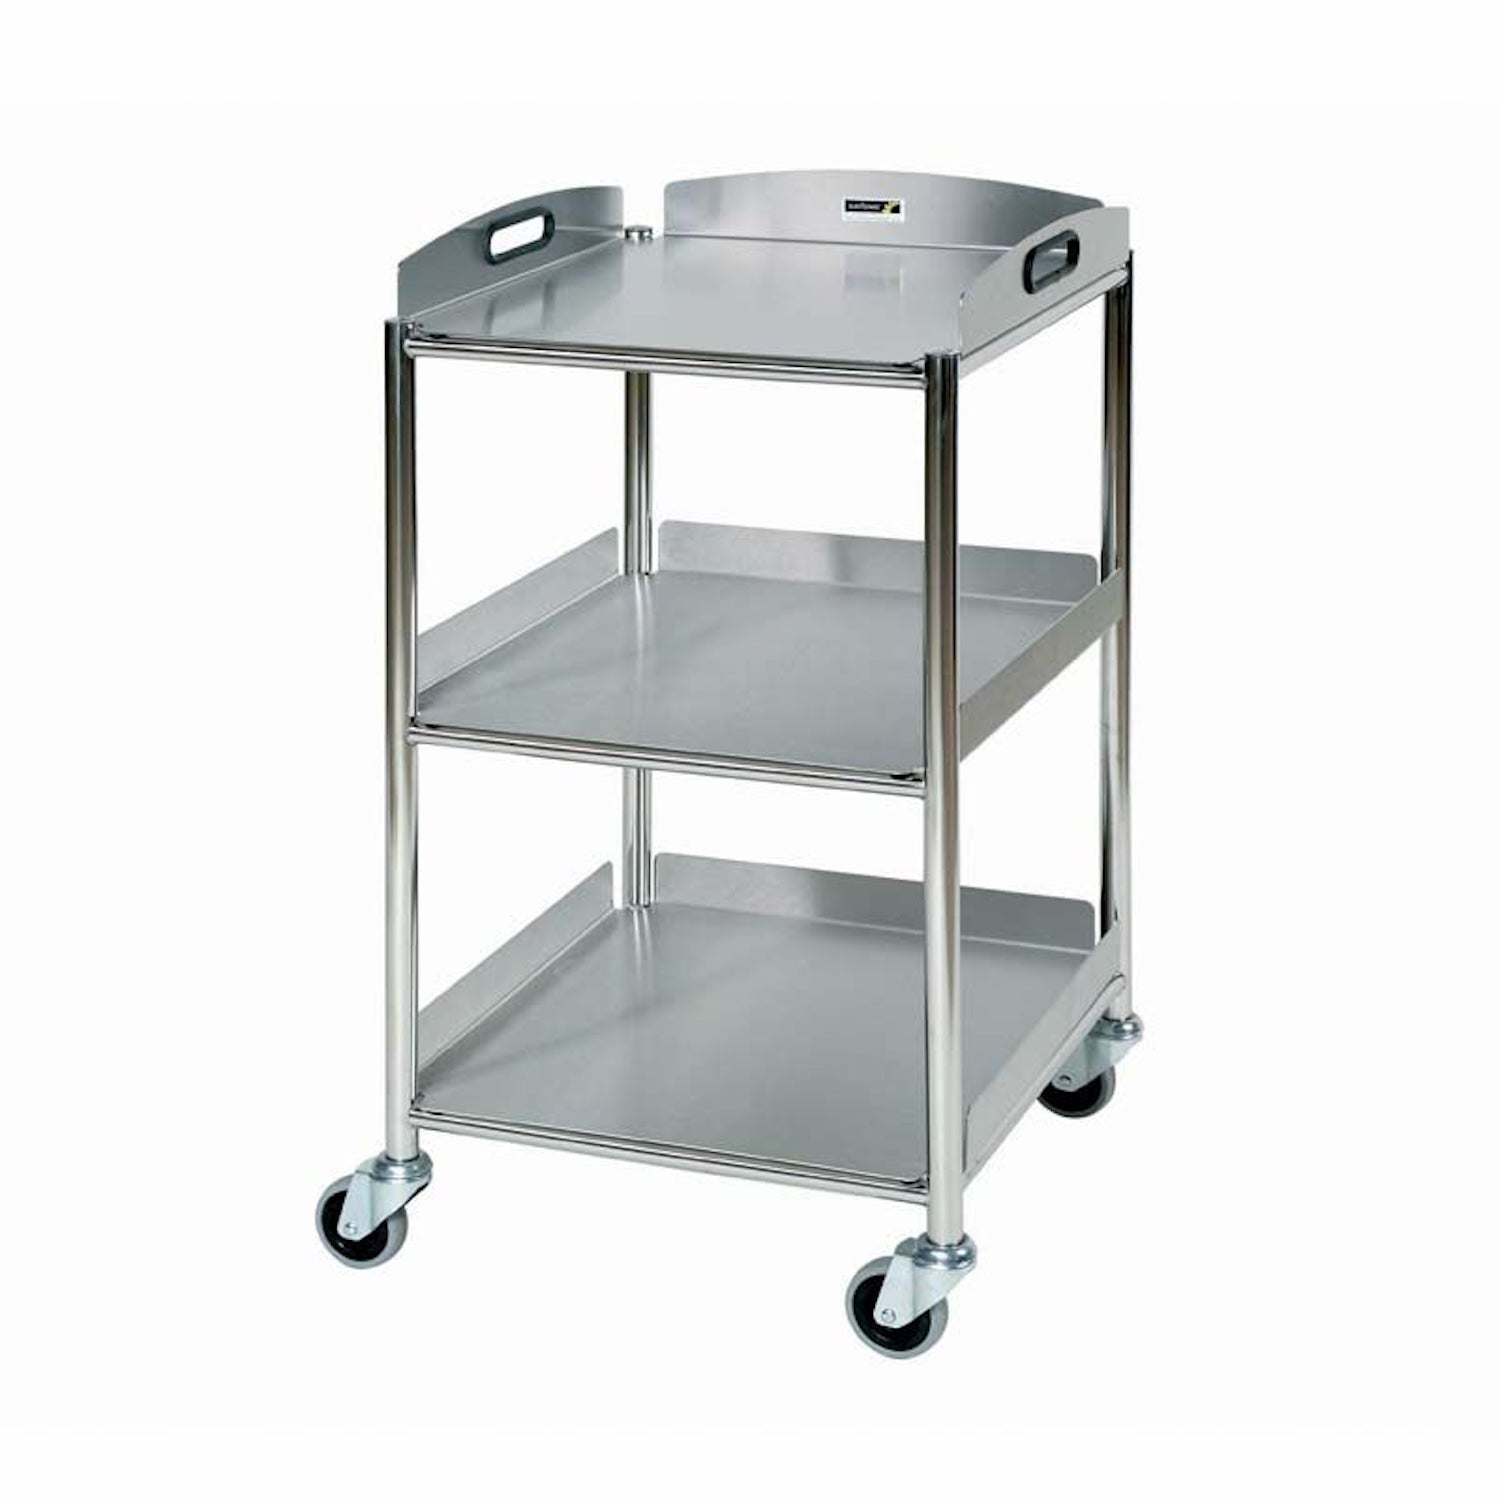 Sunflower ST4 Surgical Trolley | 3 Stainless Steel Trays